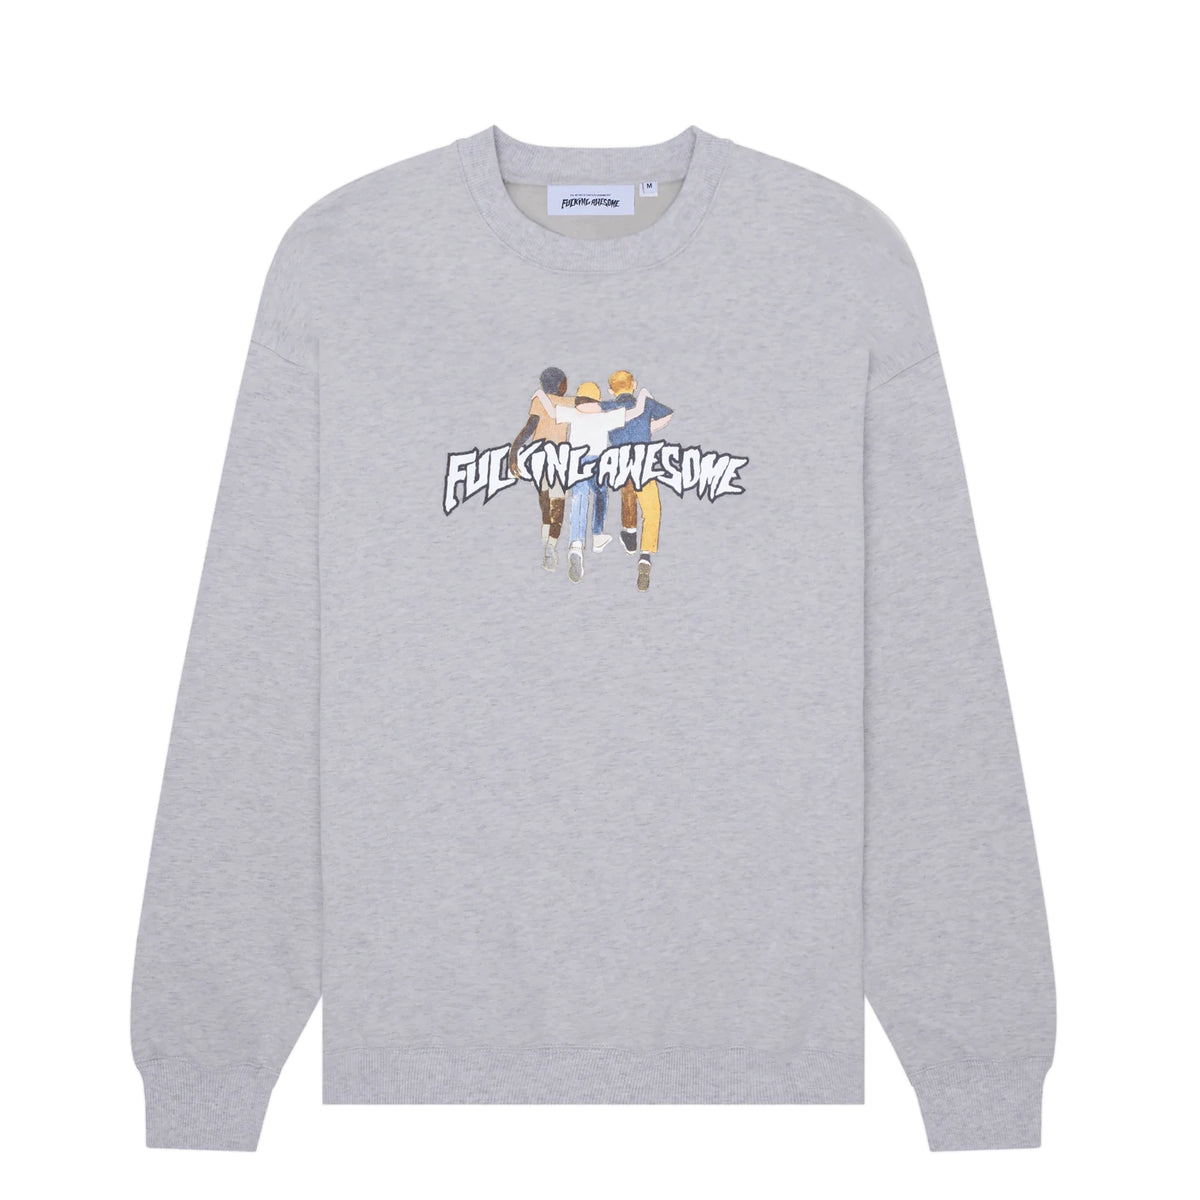 The Kids All Right Crewneck Sweatshirt in Heather Grey by Fucking